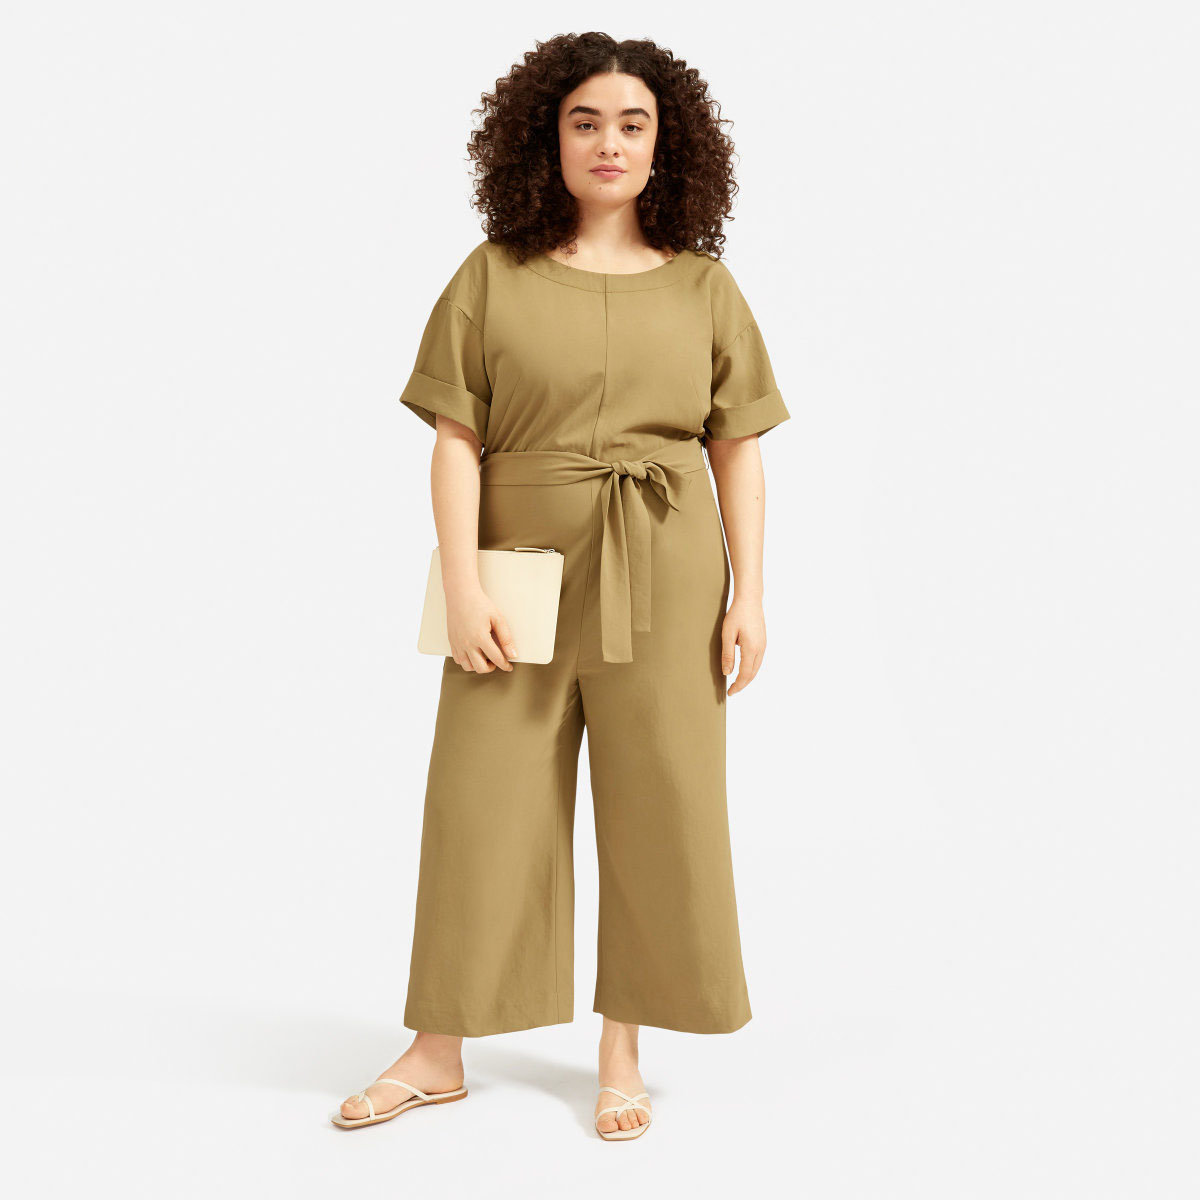 Everlane's New Jumpsuits Might Be the Comfiest Ones Ever